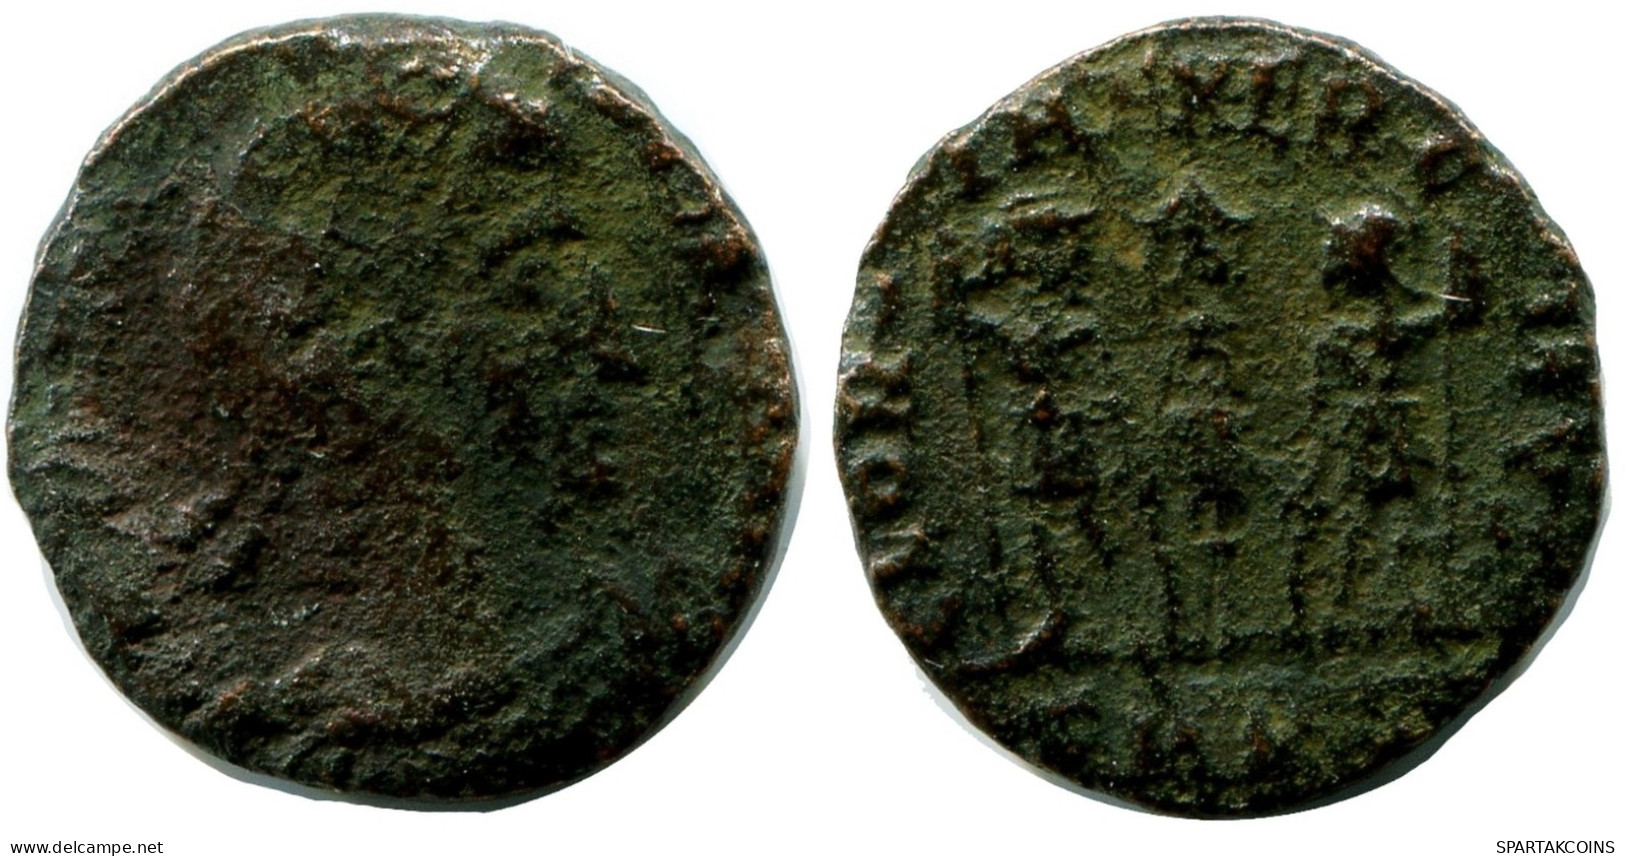 ROMAN Coin MINTED IN CYZICUS FOUND IN IHNASYAH HOARD EGYPT #ANC11047.14.D.A - The Christian Empire (307 AD Tot 363 AD)